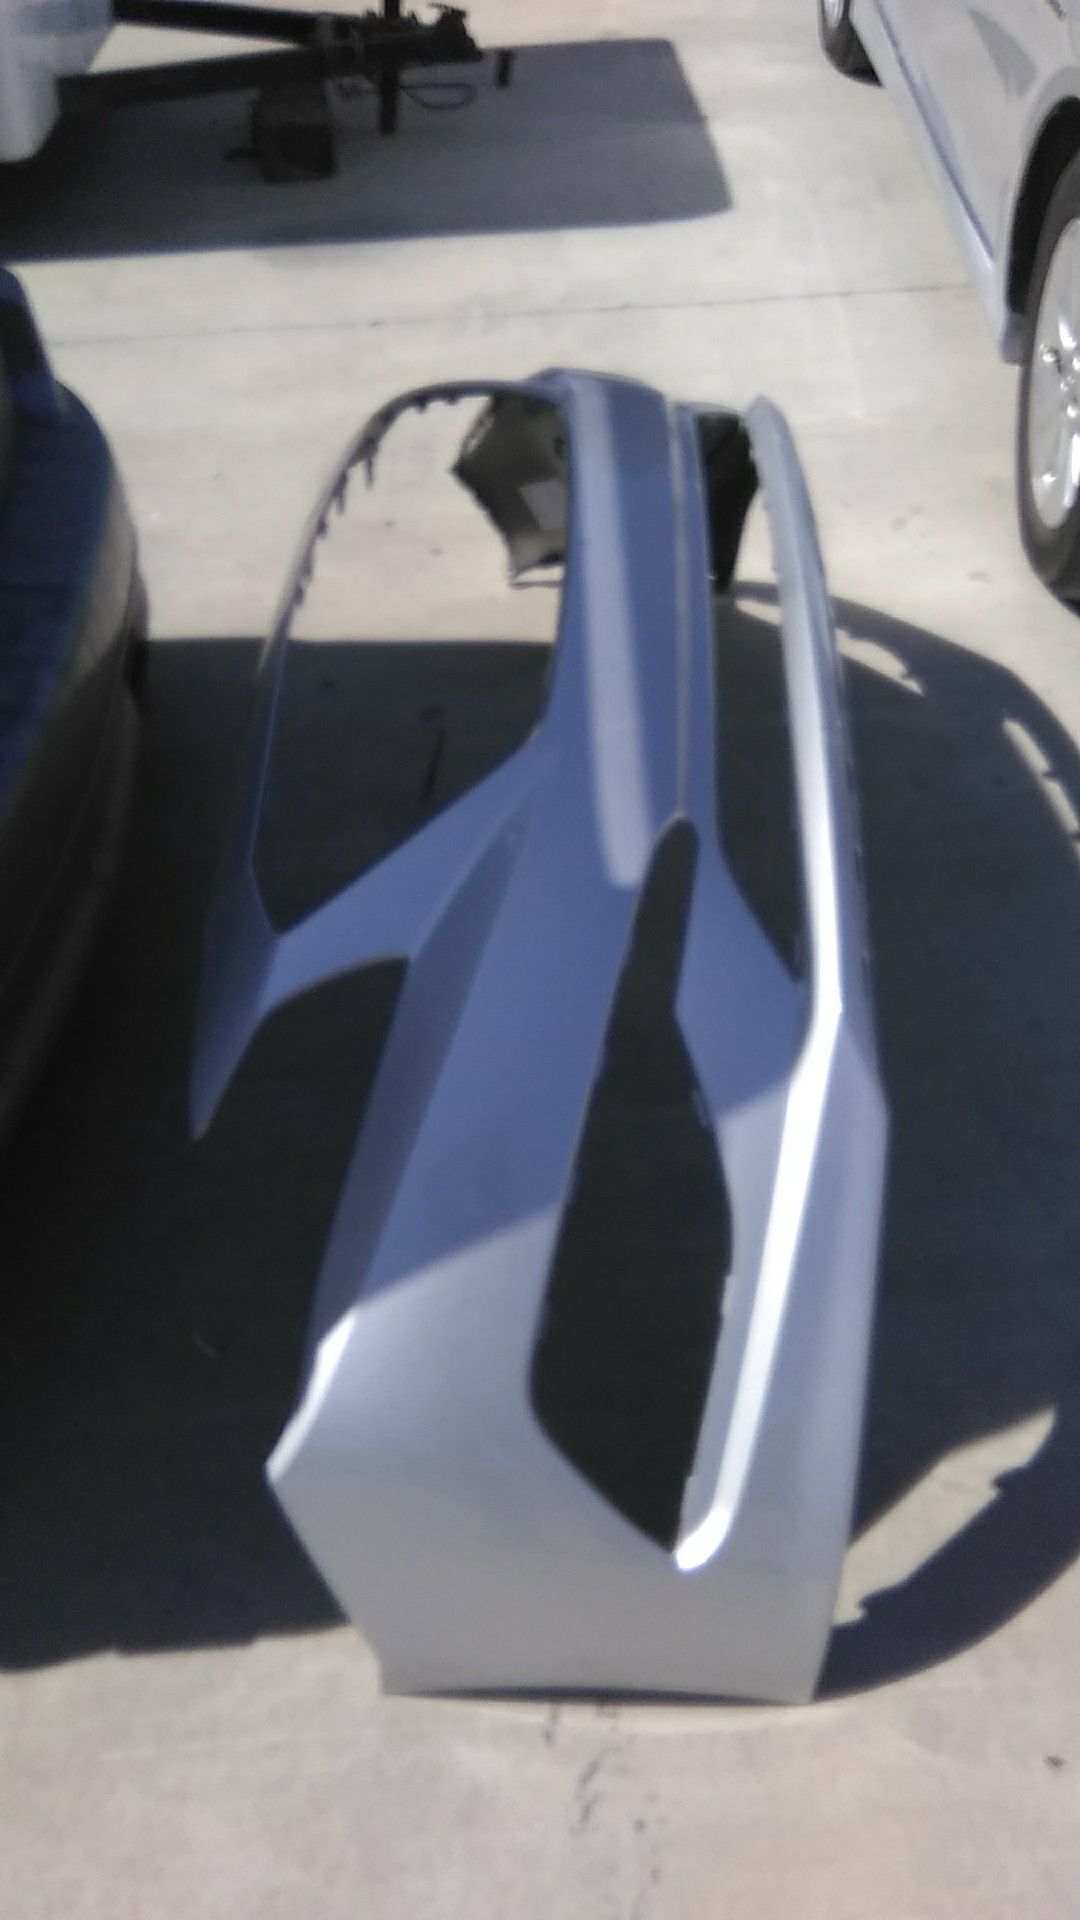 2015 Hyundai sonata front bumper band new just was paint the part store sent the wrong bumper and the painter painted it . Silver